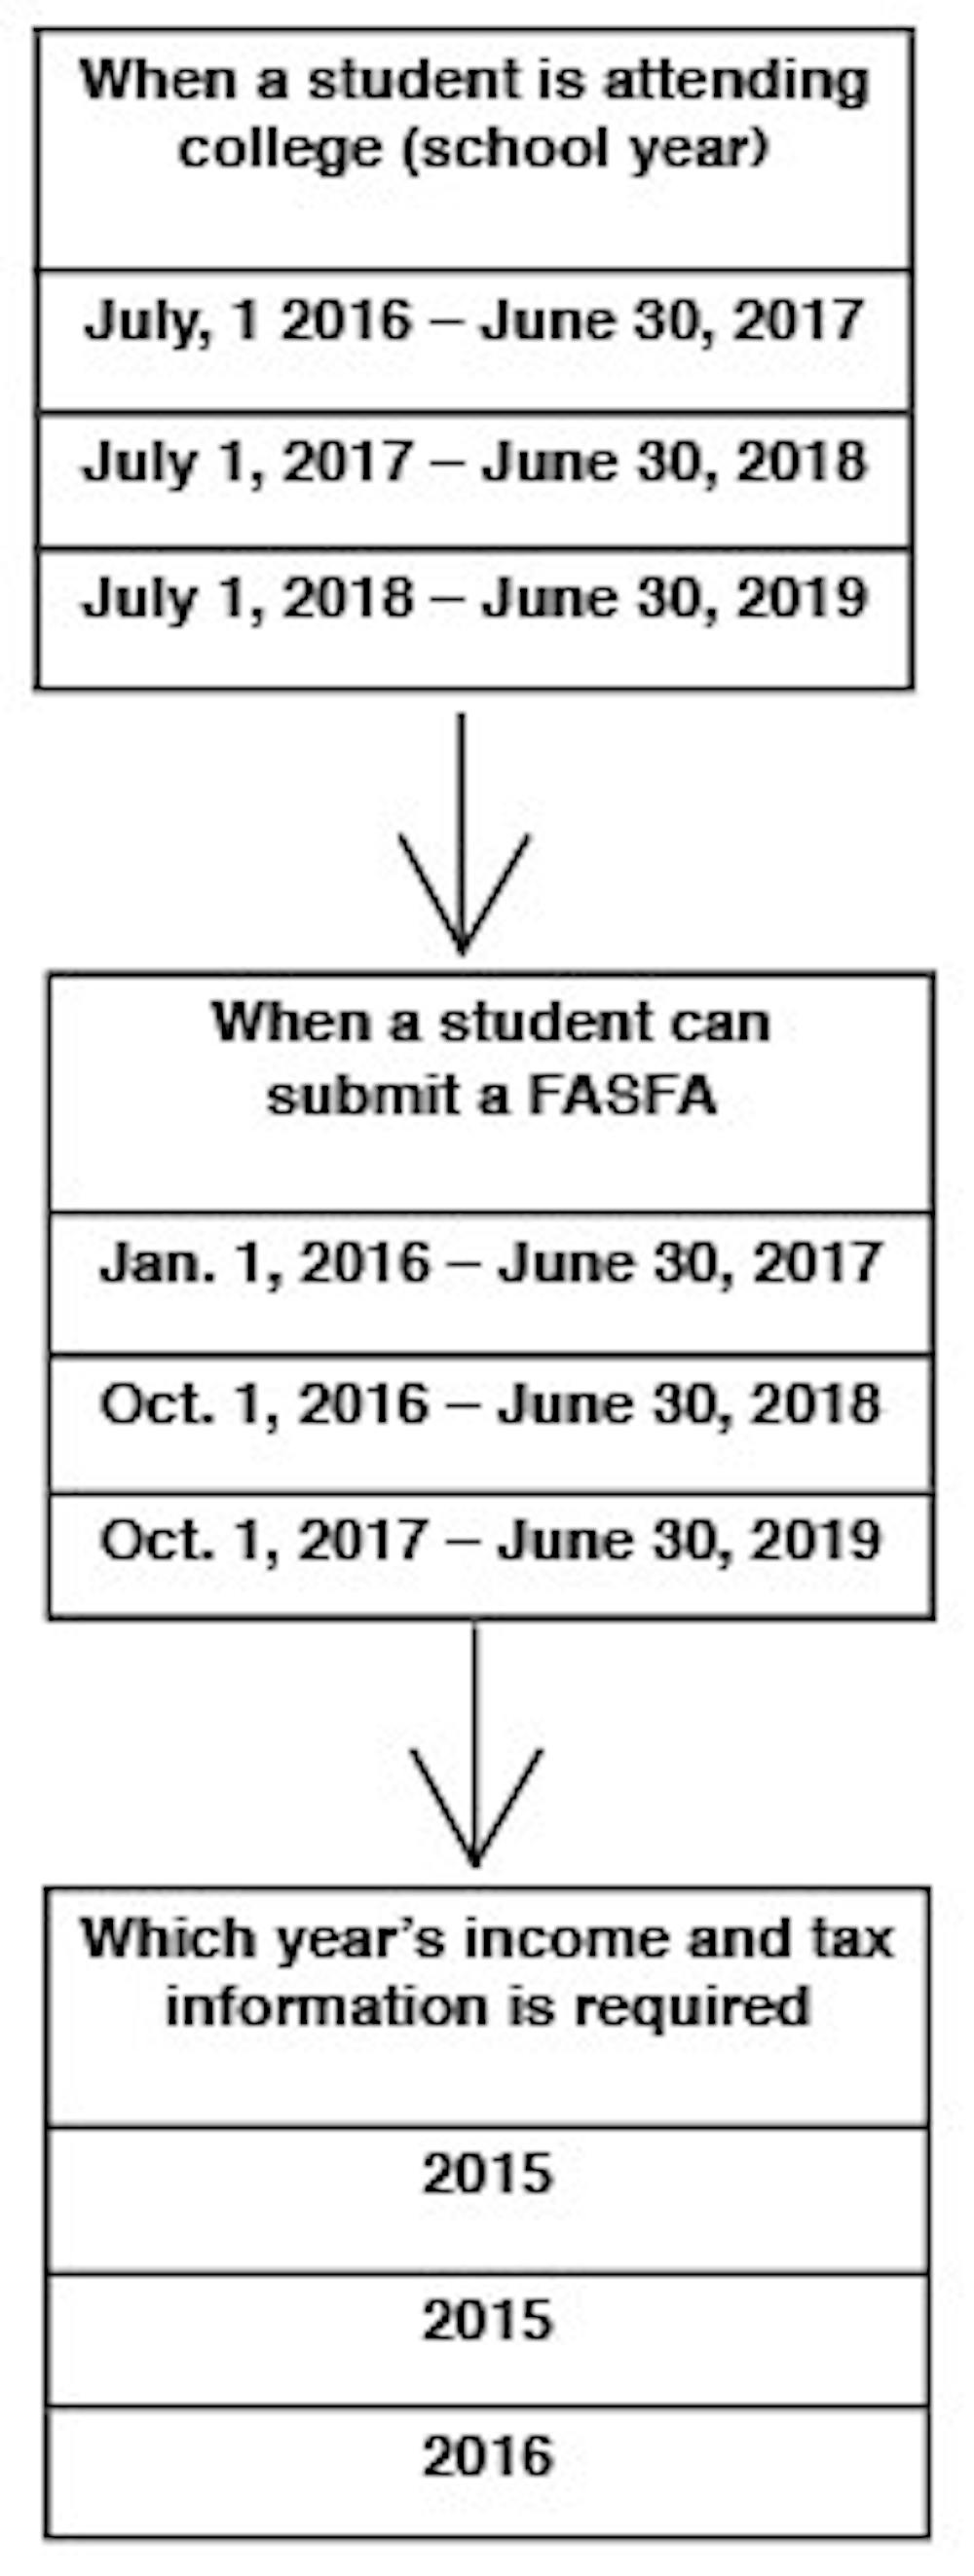 Financial Aid Office releases details about FAFSA